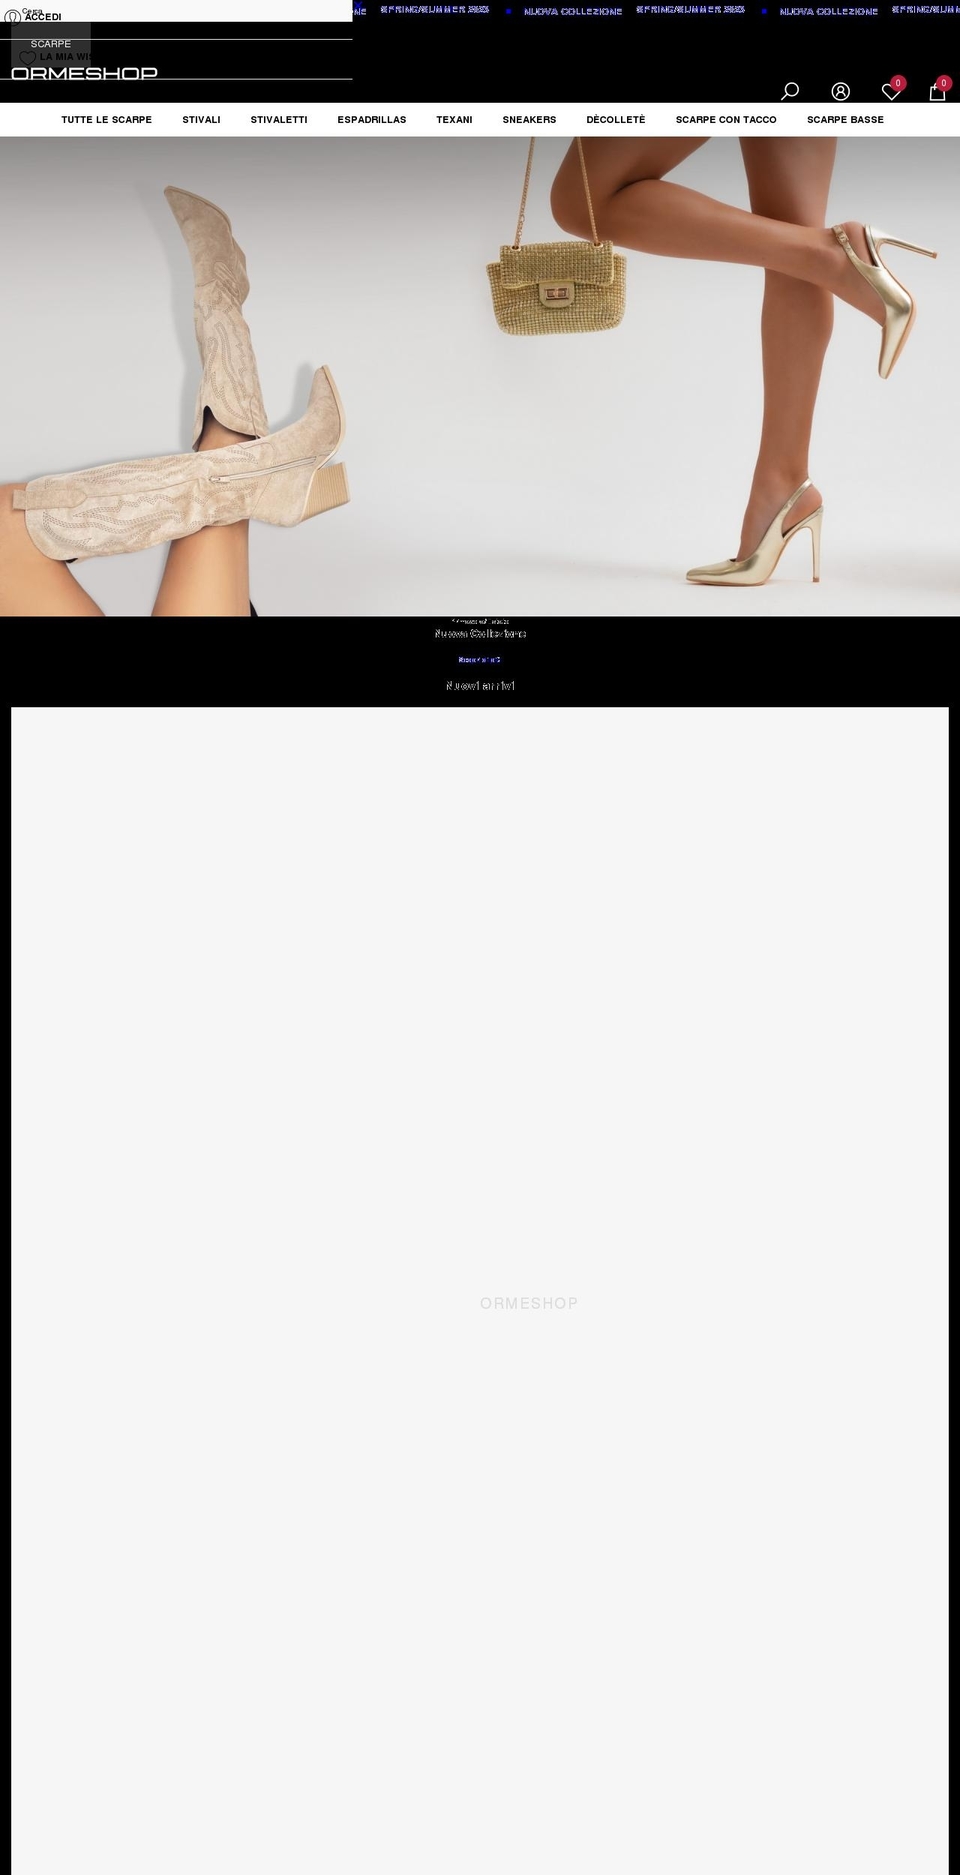 Halo Shopify theme site example ormeshop.it